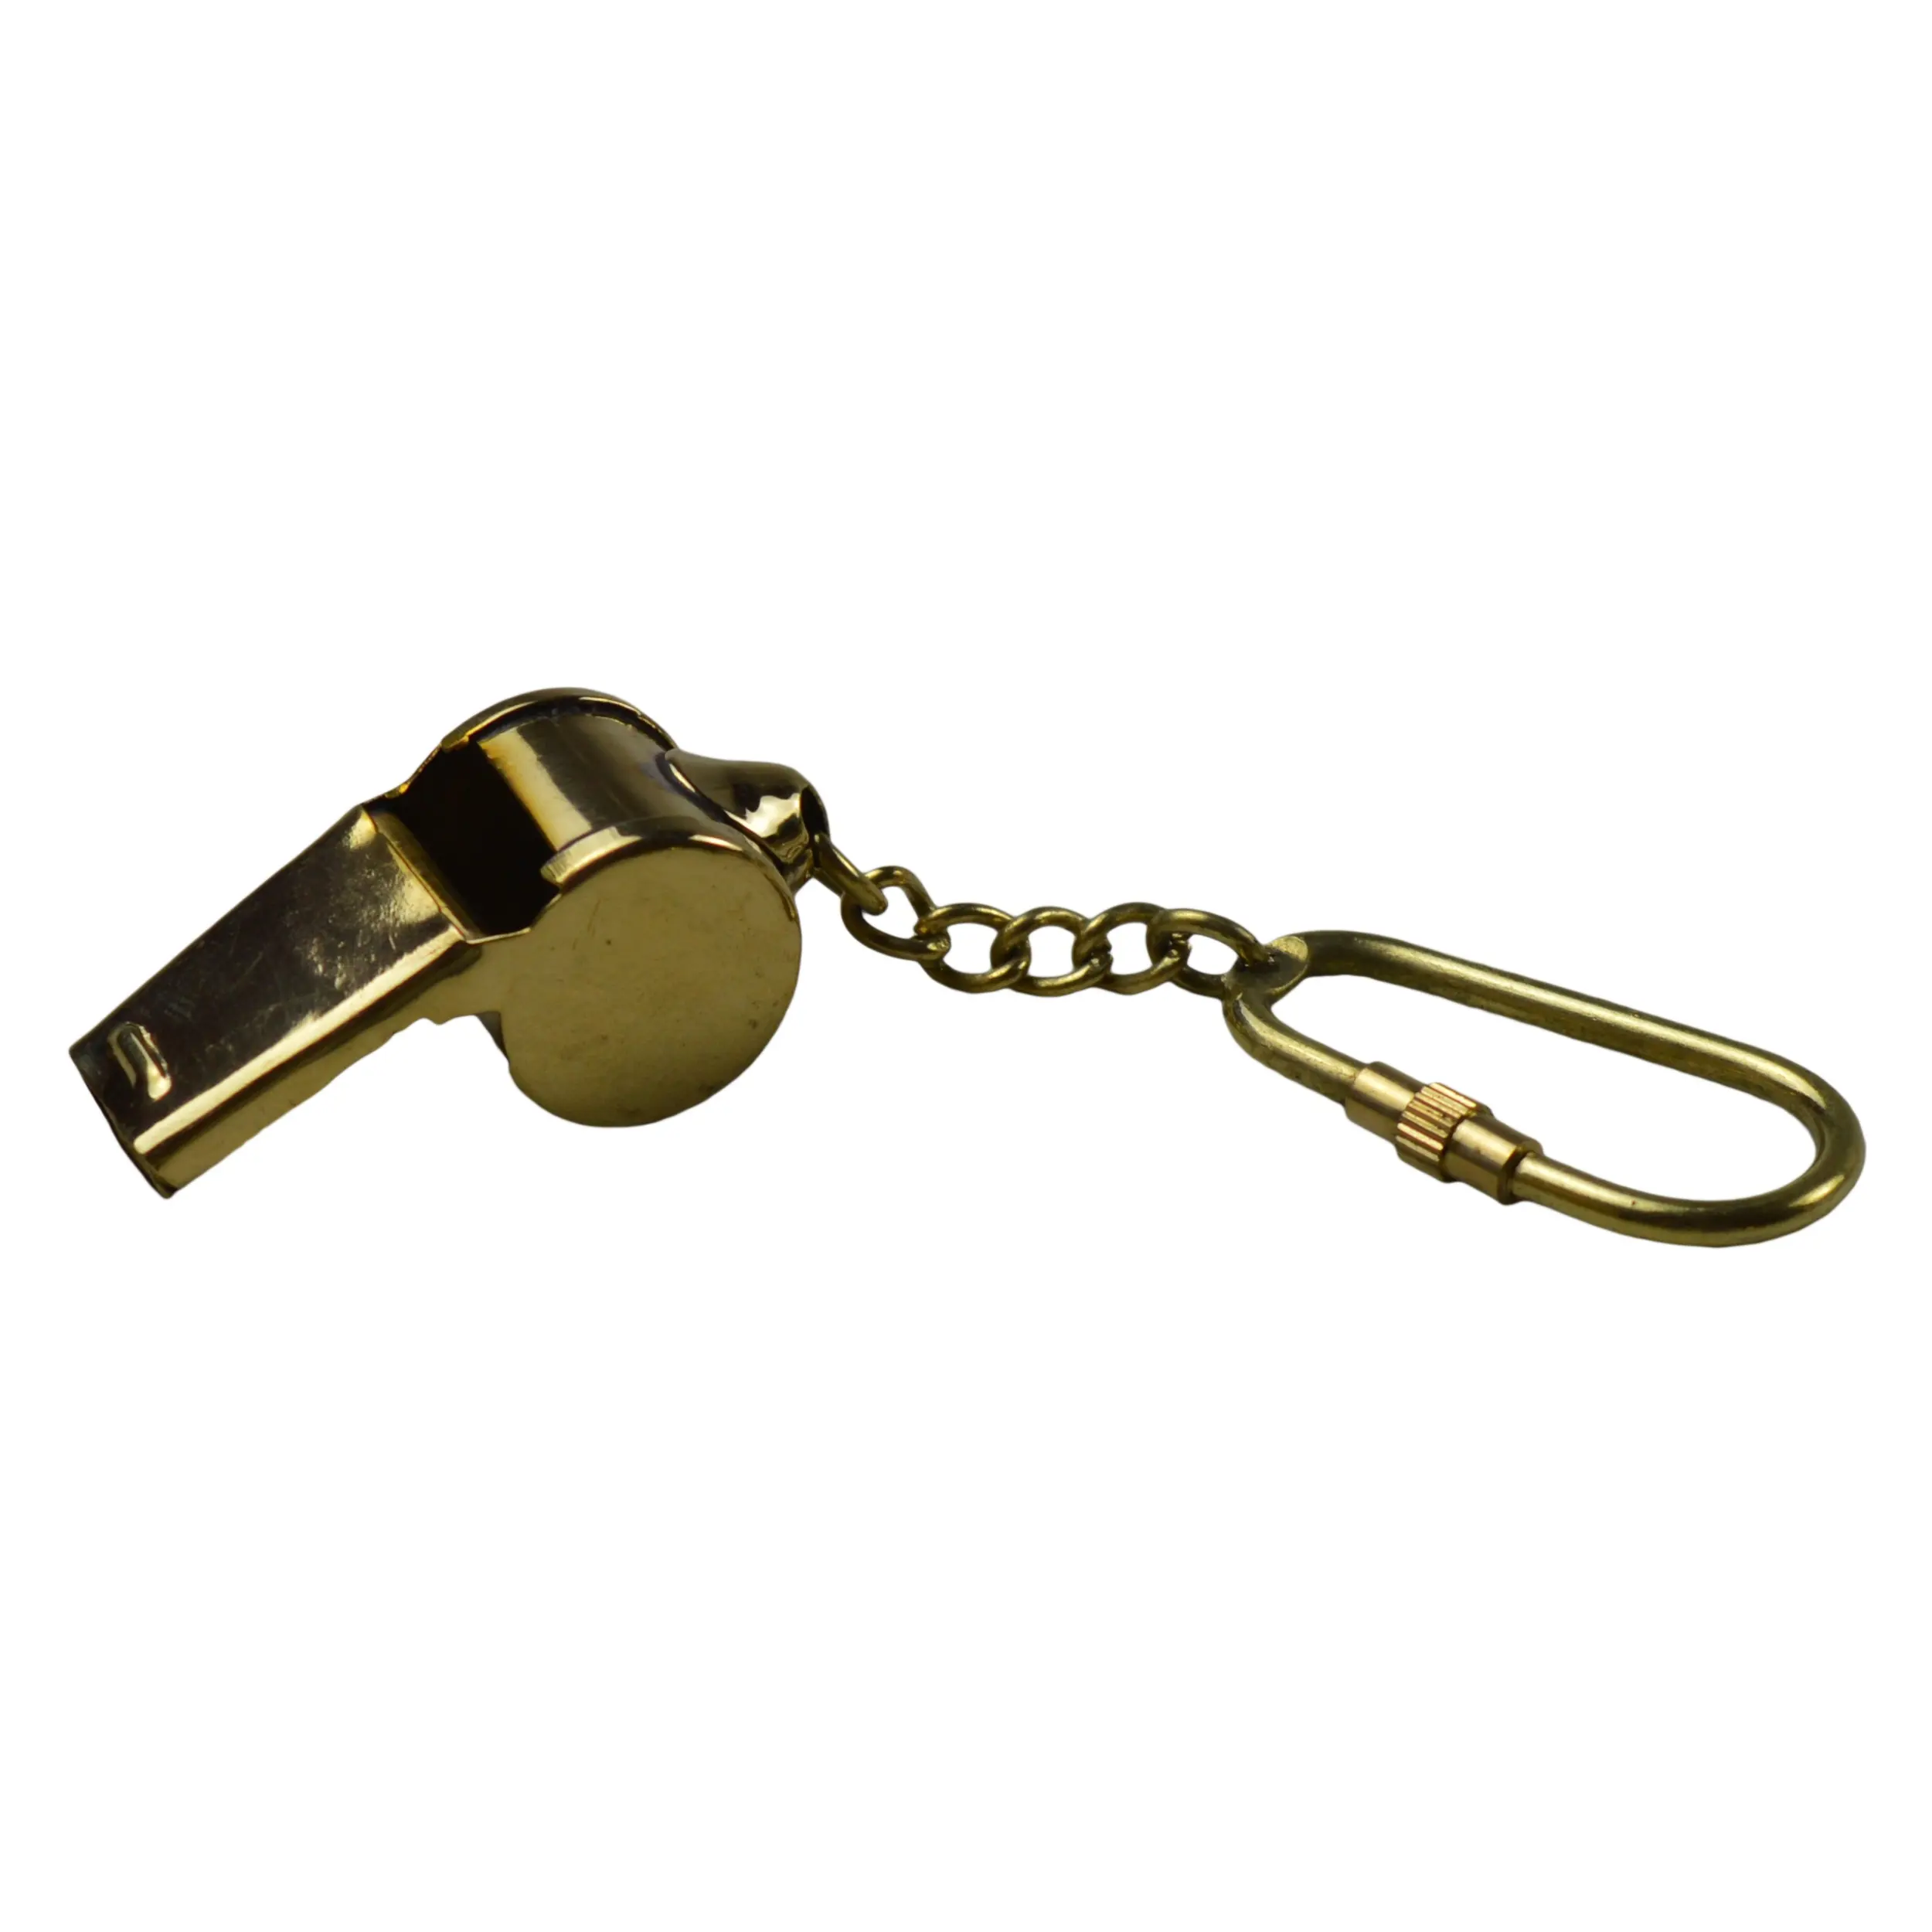 Decor Gold Colored Finishing Design Key Holder With Decorative Brass Metal Design Key Ring Best Whistle Shaped Key Chain